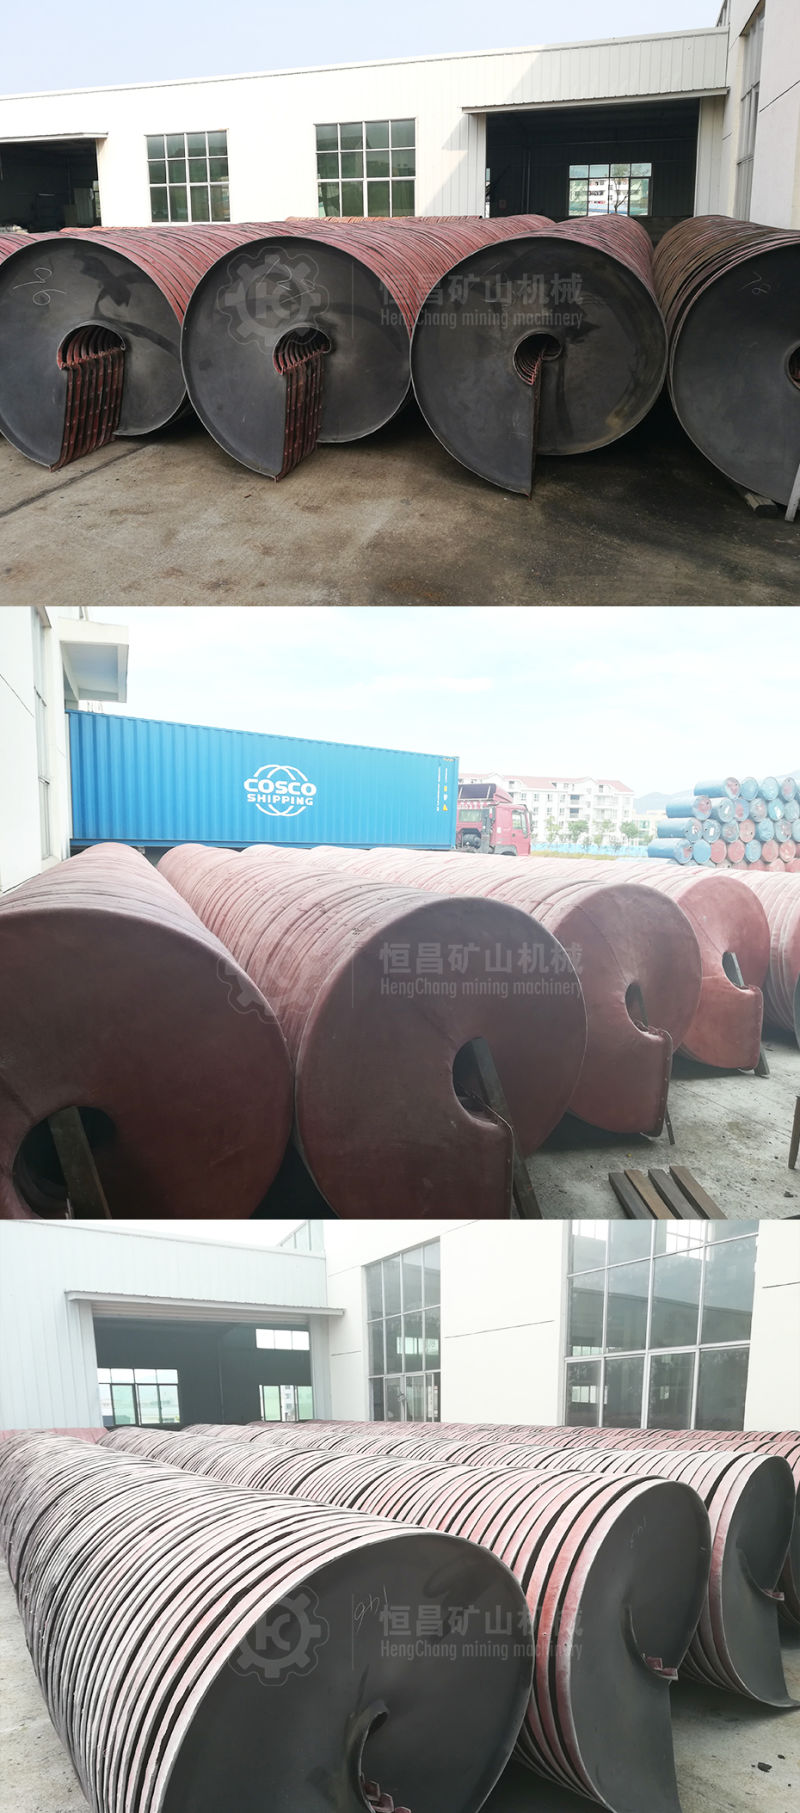 Bll 600 Gravity Spiral Chute Separator for Dressing 0.3-0.02 mm Iron Ore